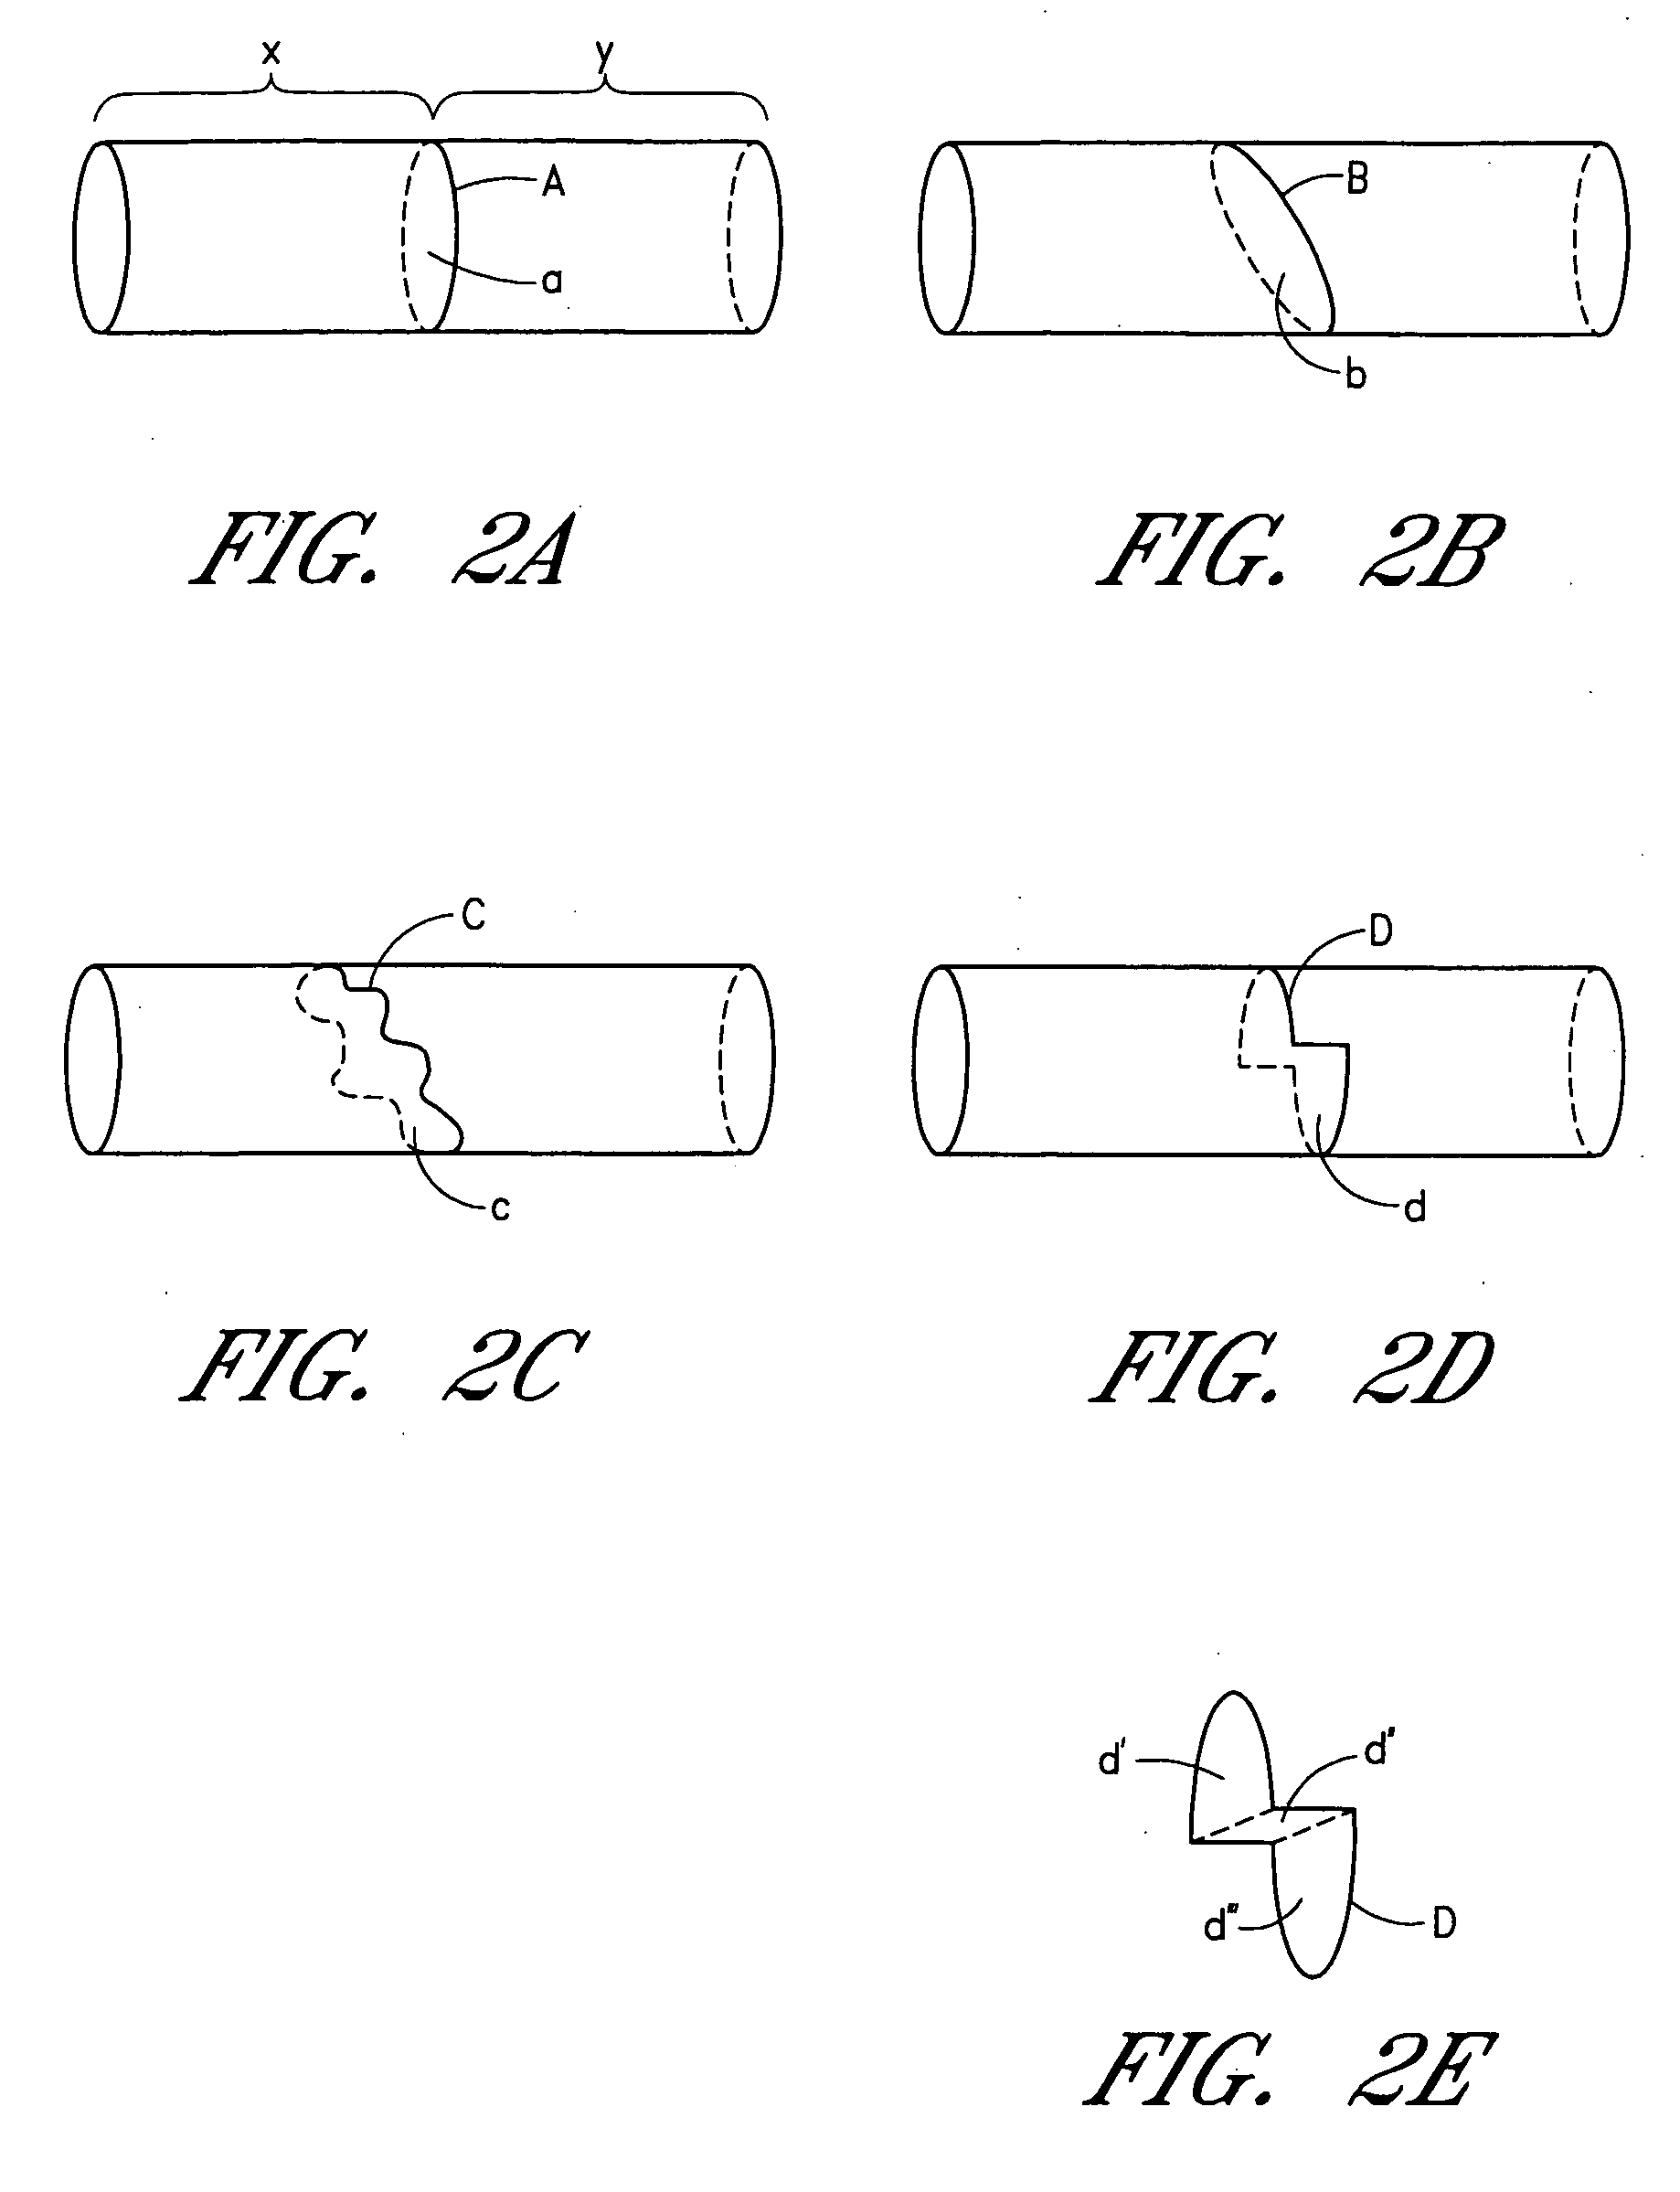 Tissue ablation device assembly and method for electrically isolating a pulmonary vein ostium from an atrial wall